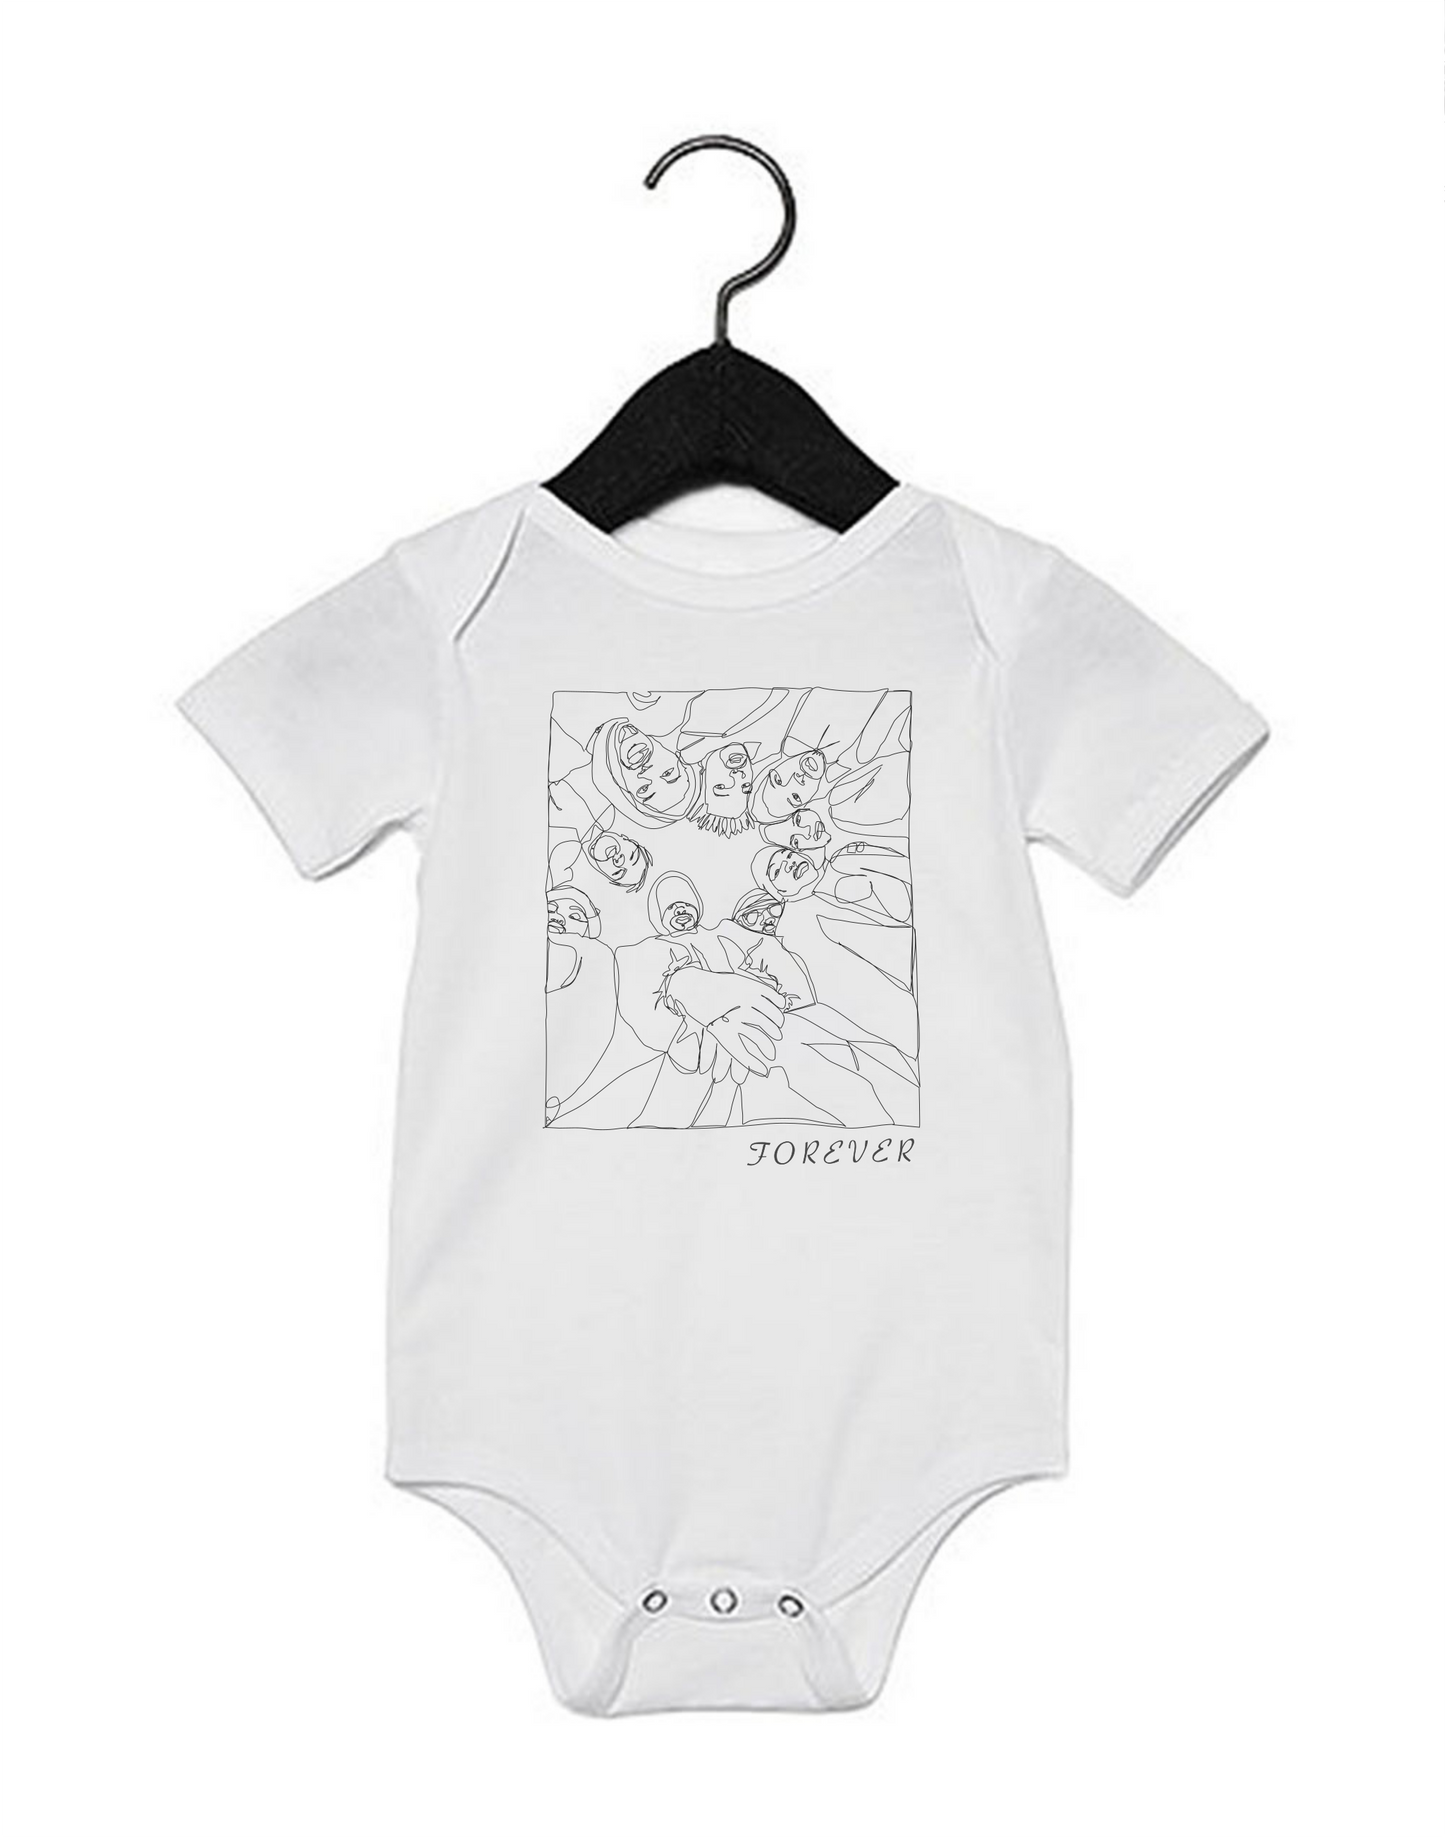 Wu-Tang Forever Baby One Piece